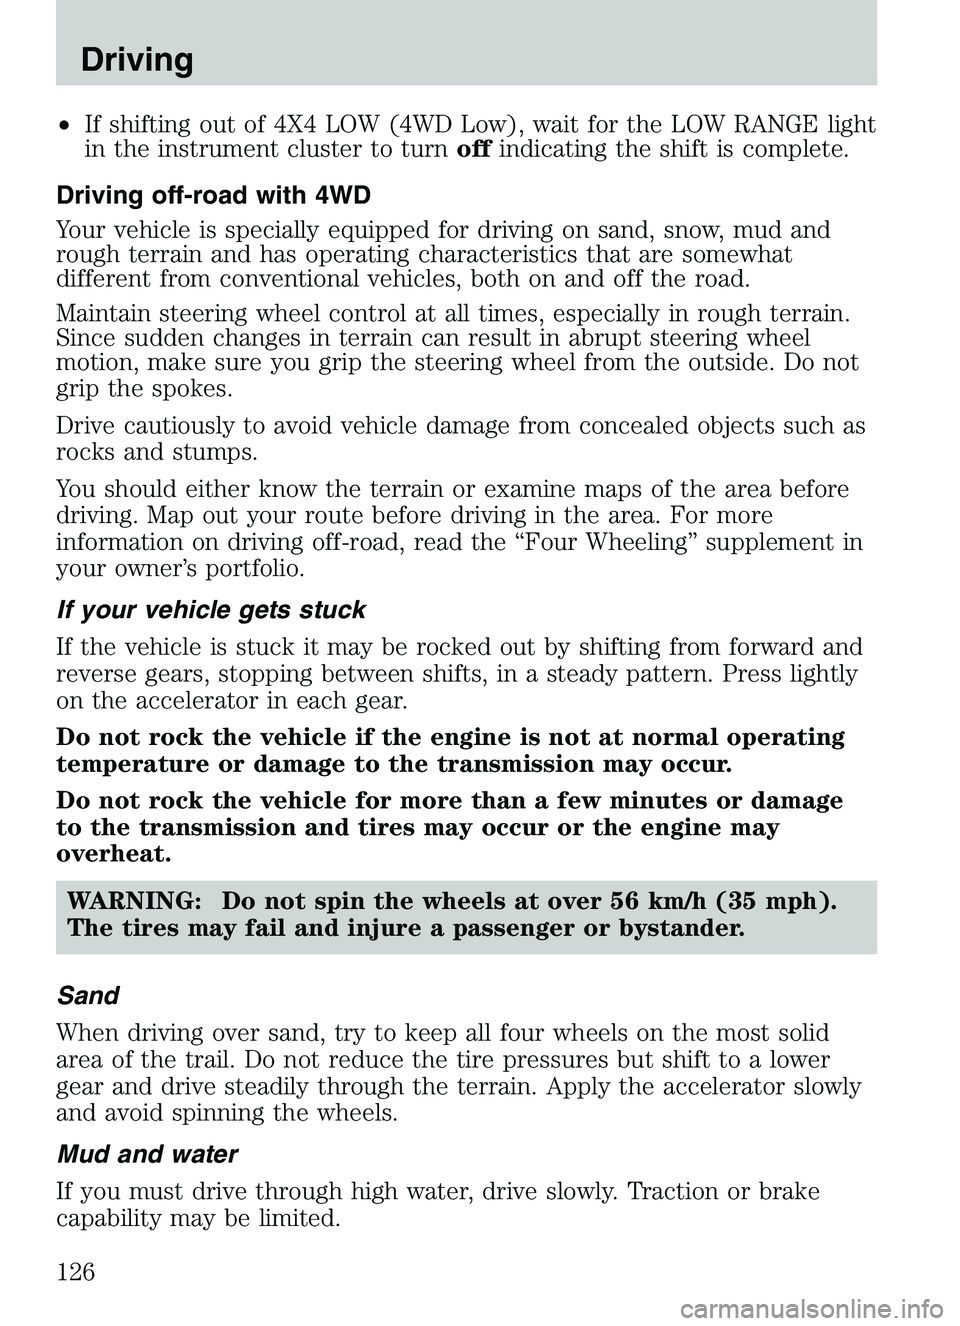 MAZDA MODEL B4000 2003  Owners Manual •If shifting out of 4X4 LOW (4WD Low), wait for the LOW RANGE light
in the instrument cluster to turn offindicating the shift is complete.
Driving off-road with 4WD
Your vehicle is specially equippe